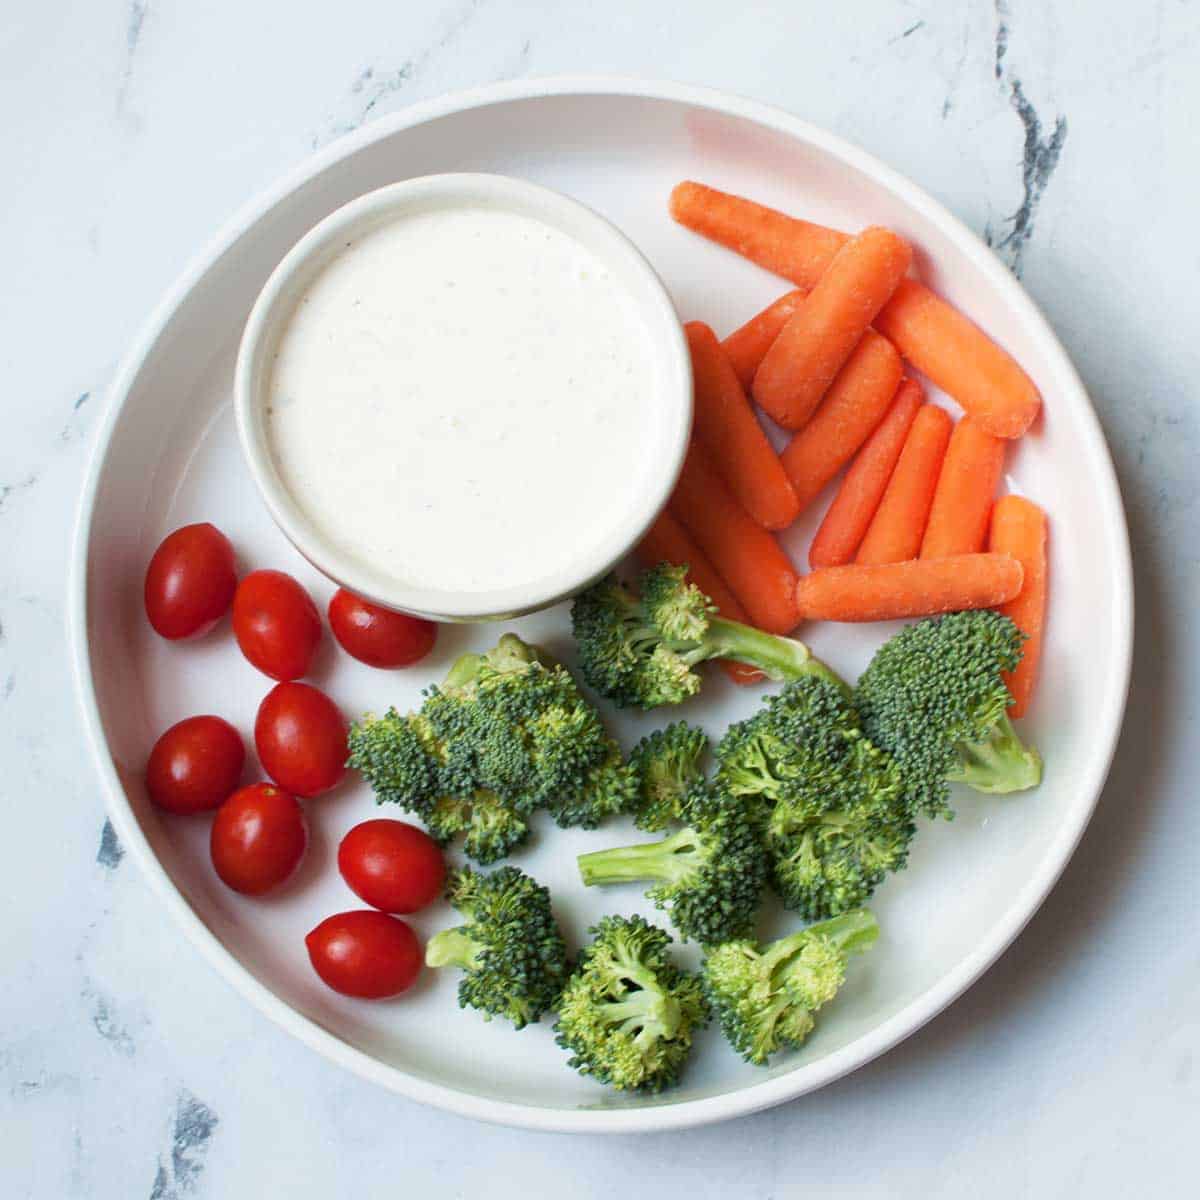 bowl of ranch surrounded by carrots, broccoli, and tomatoes.